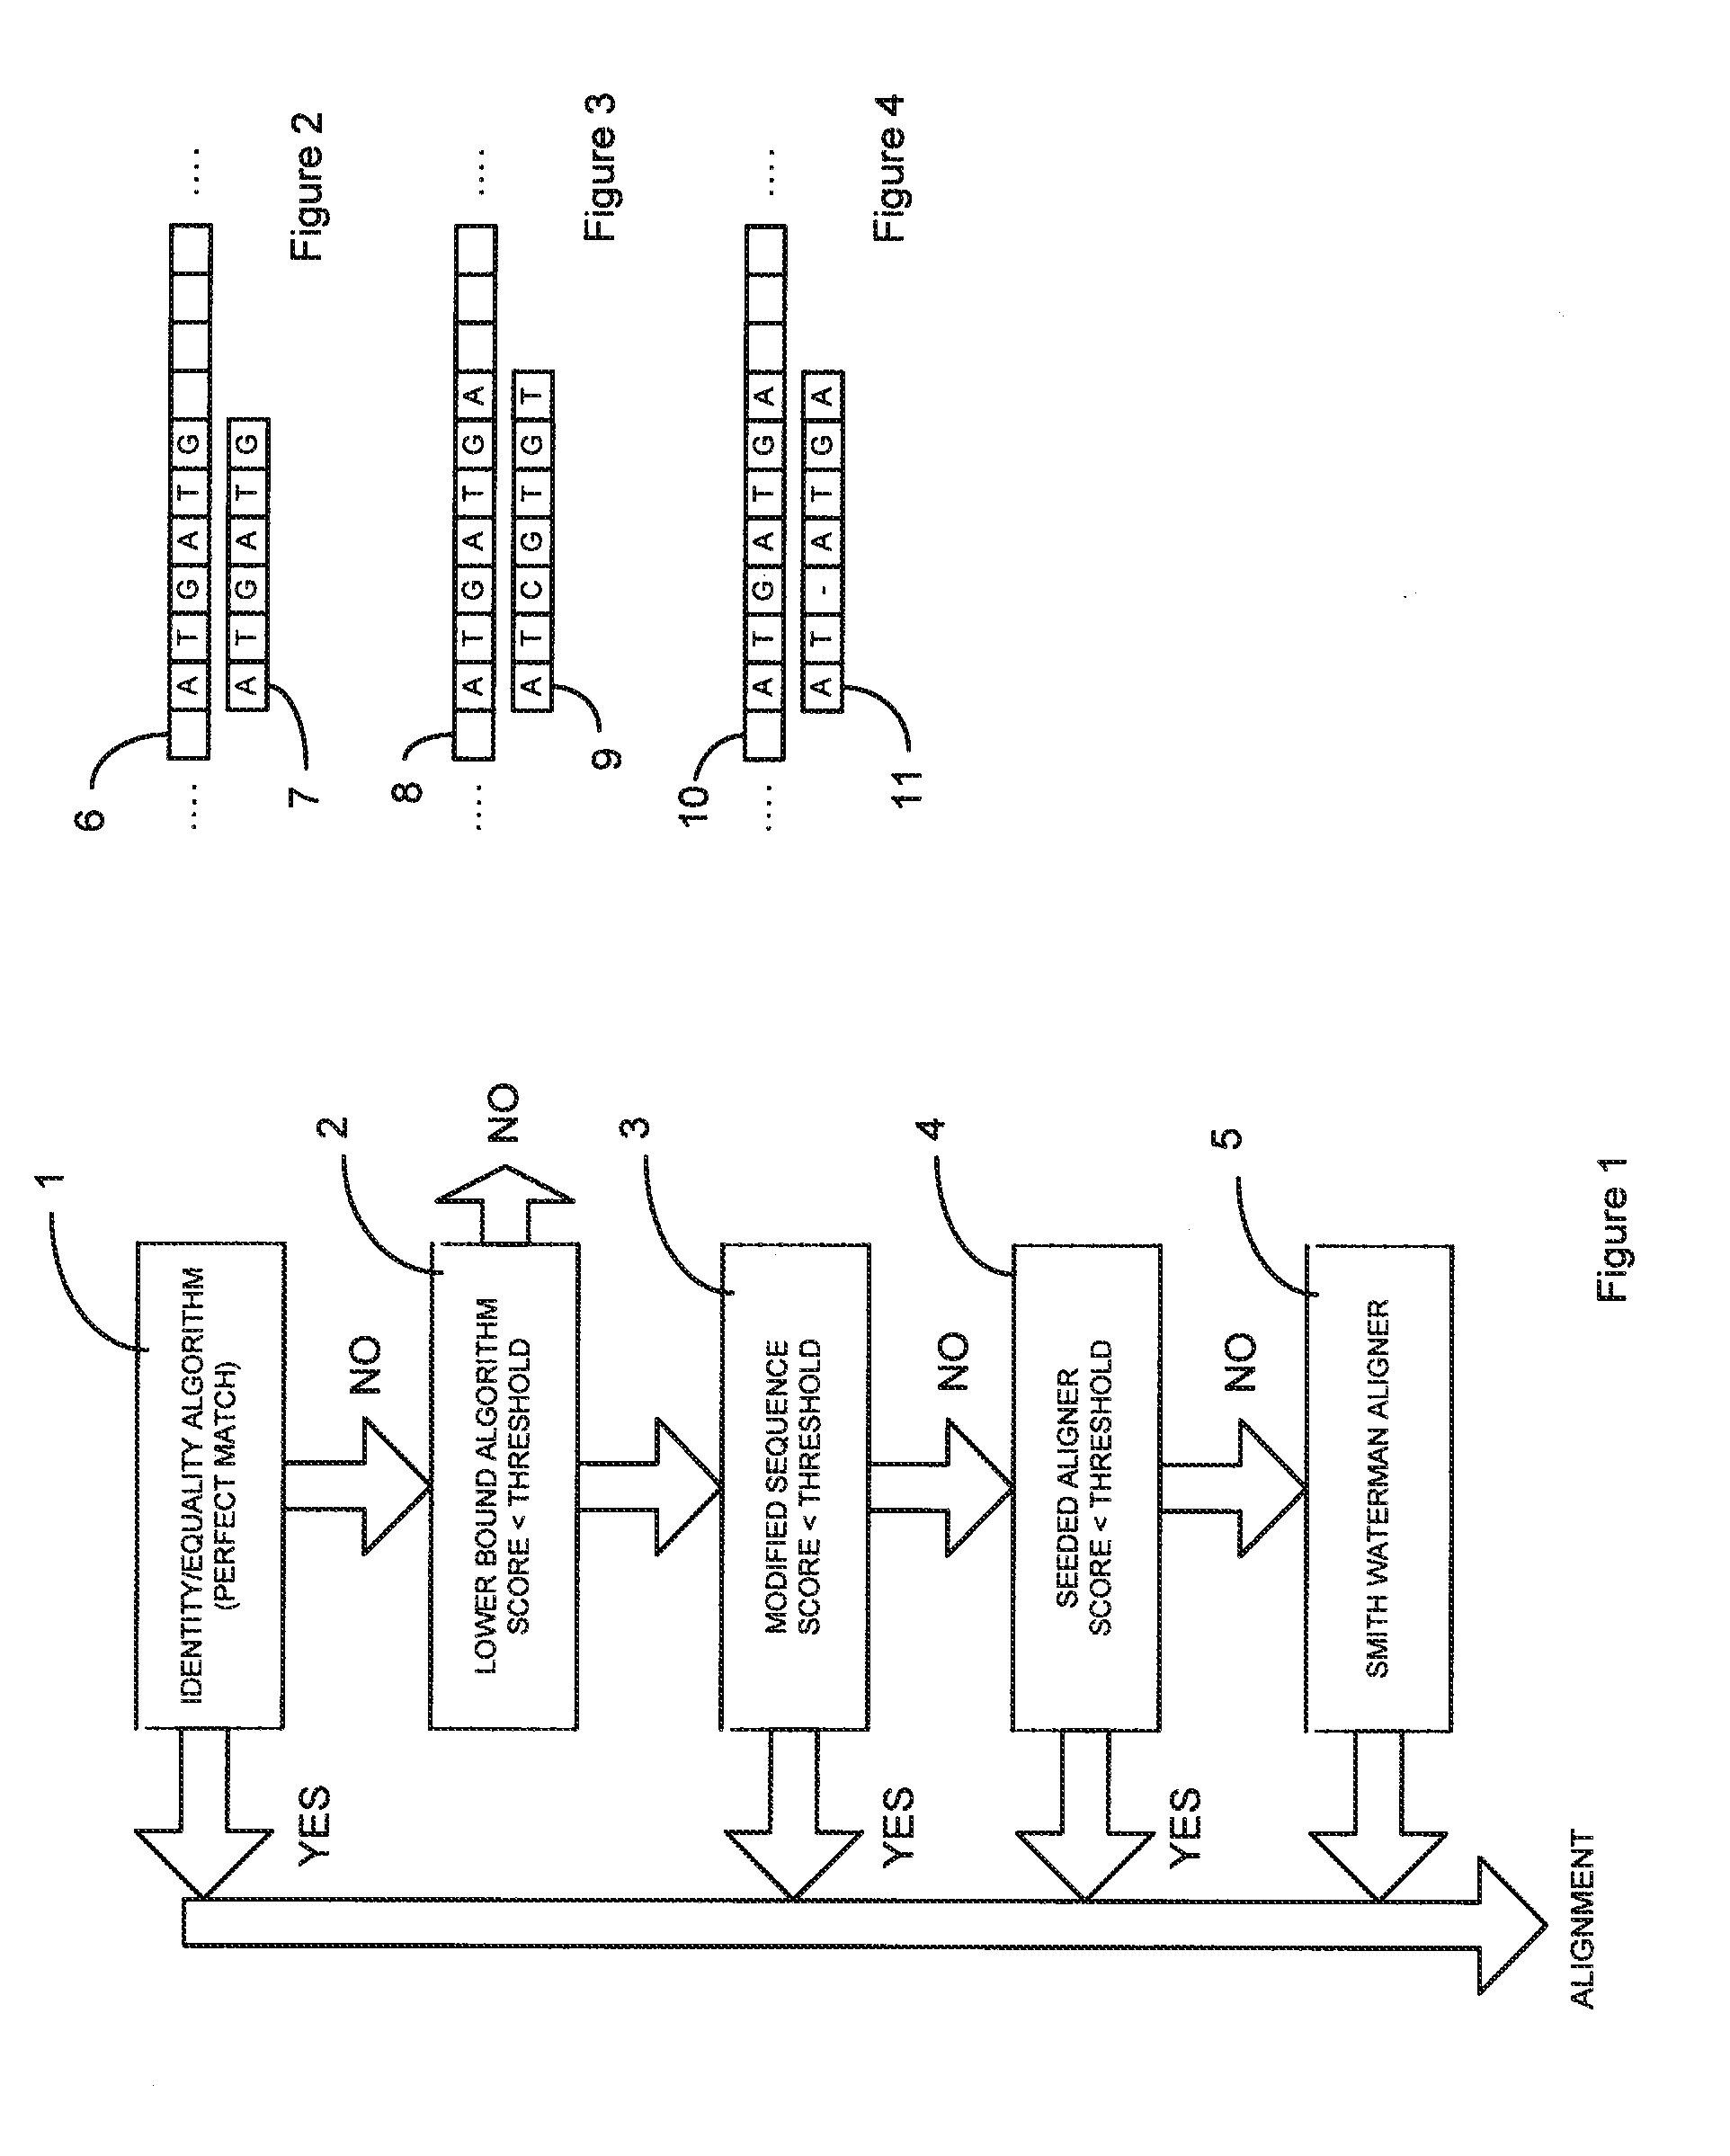 Method and system for evaluating sequences